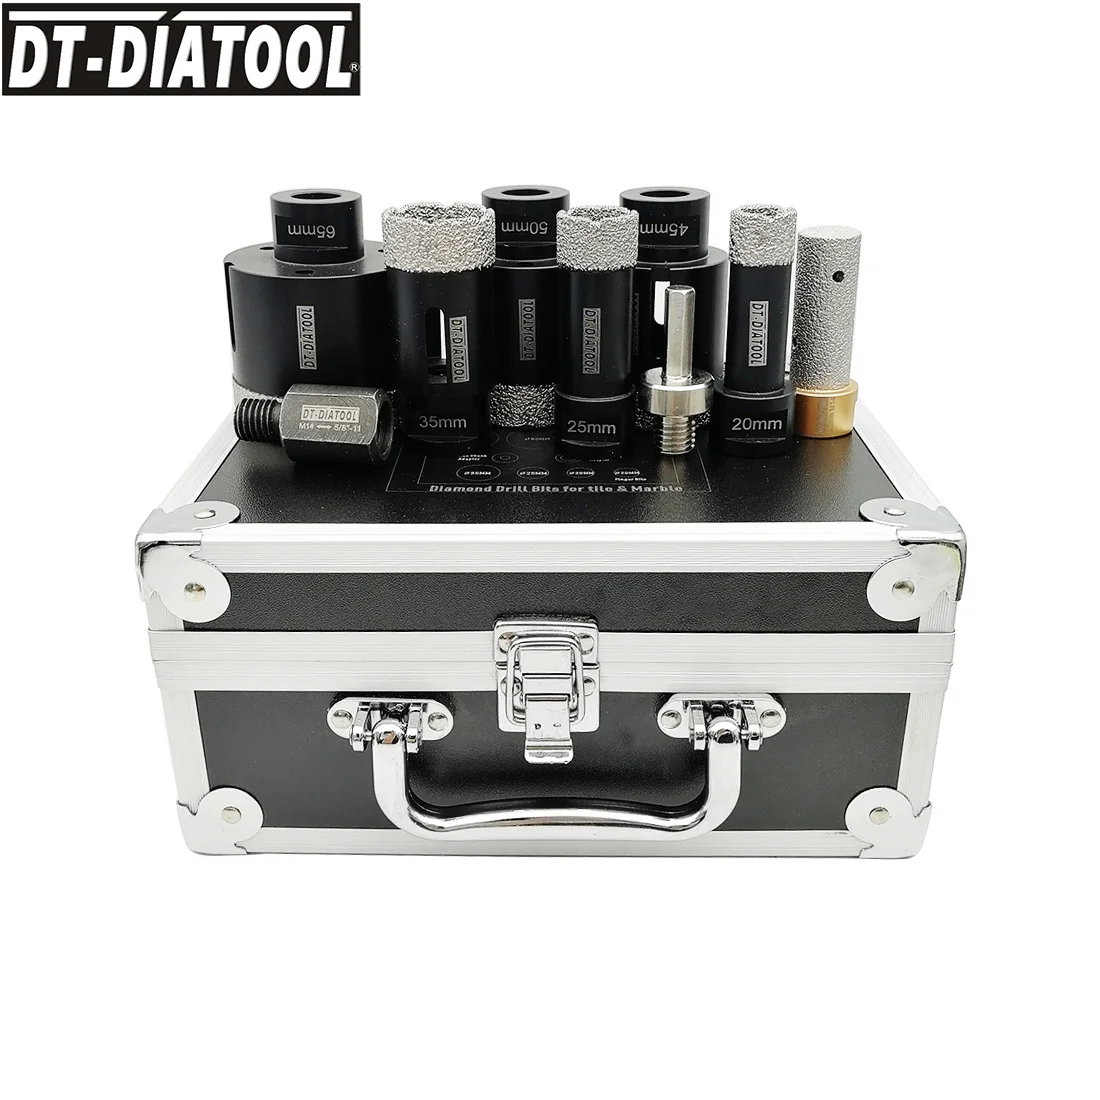 DT-DIATOOL 1set Diamond Drill Core Bits, Boxed Vacuum Brazed  M14 or 5/8-11 Mixed size Hole Saw Plus 3/8